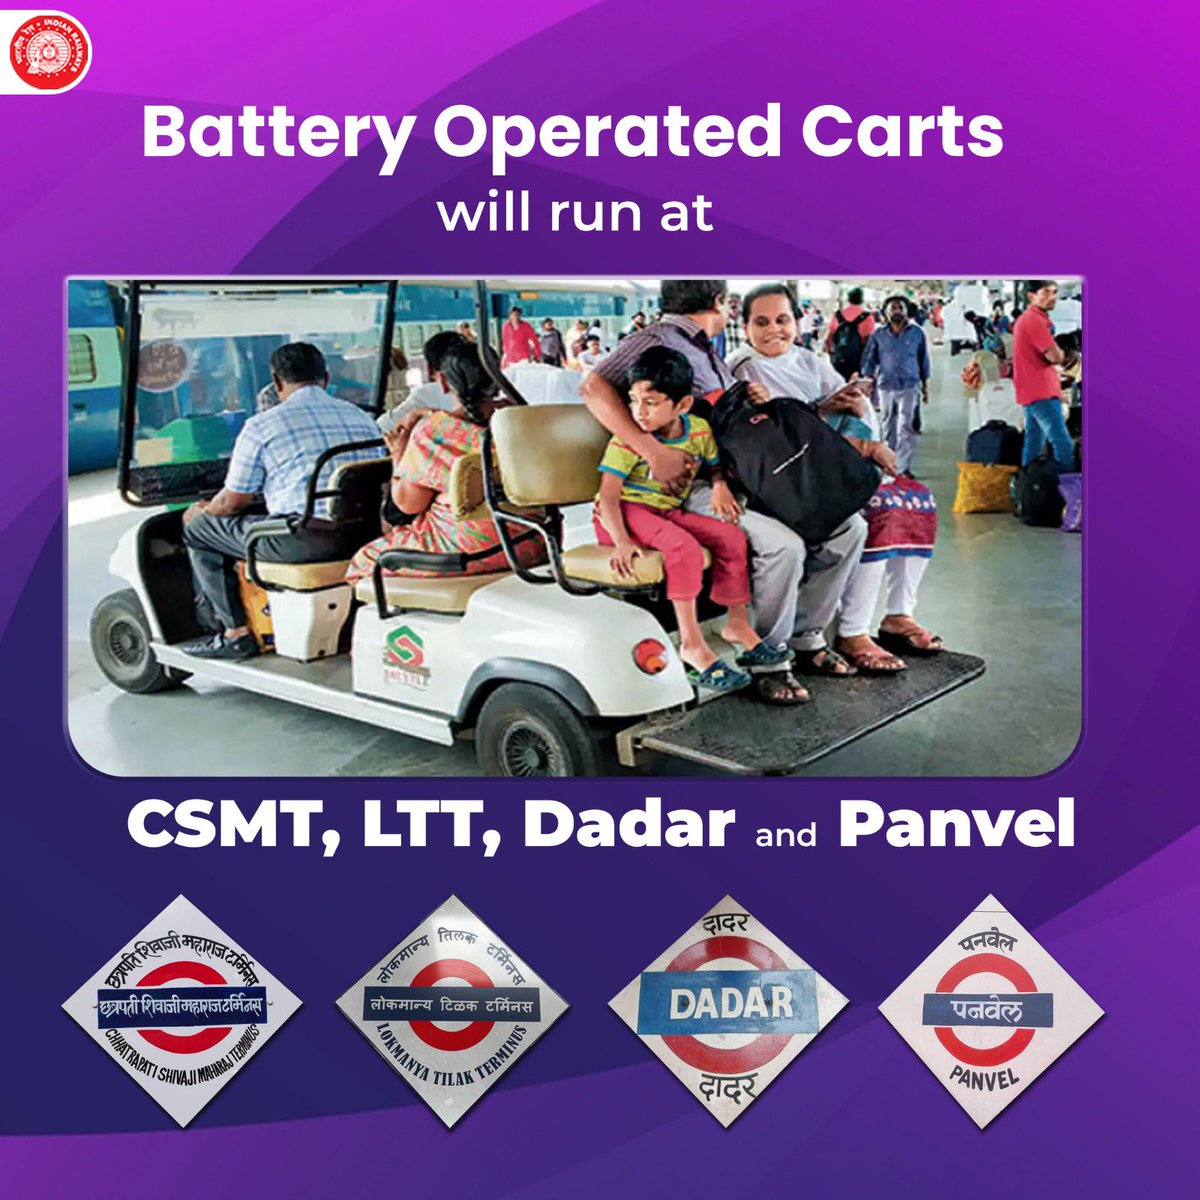 Battery Operated Carts will run at CSMT, LTT, Dadar, and Panvel stations, enhancing convenience and mobility for passengers. #RailwayInnovation #MobilityUpgrade